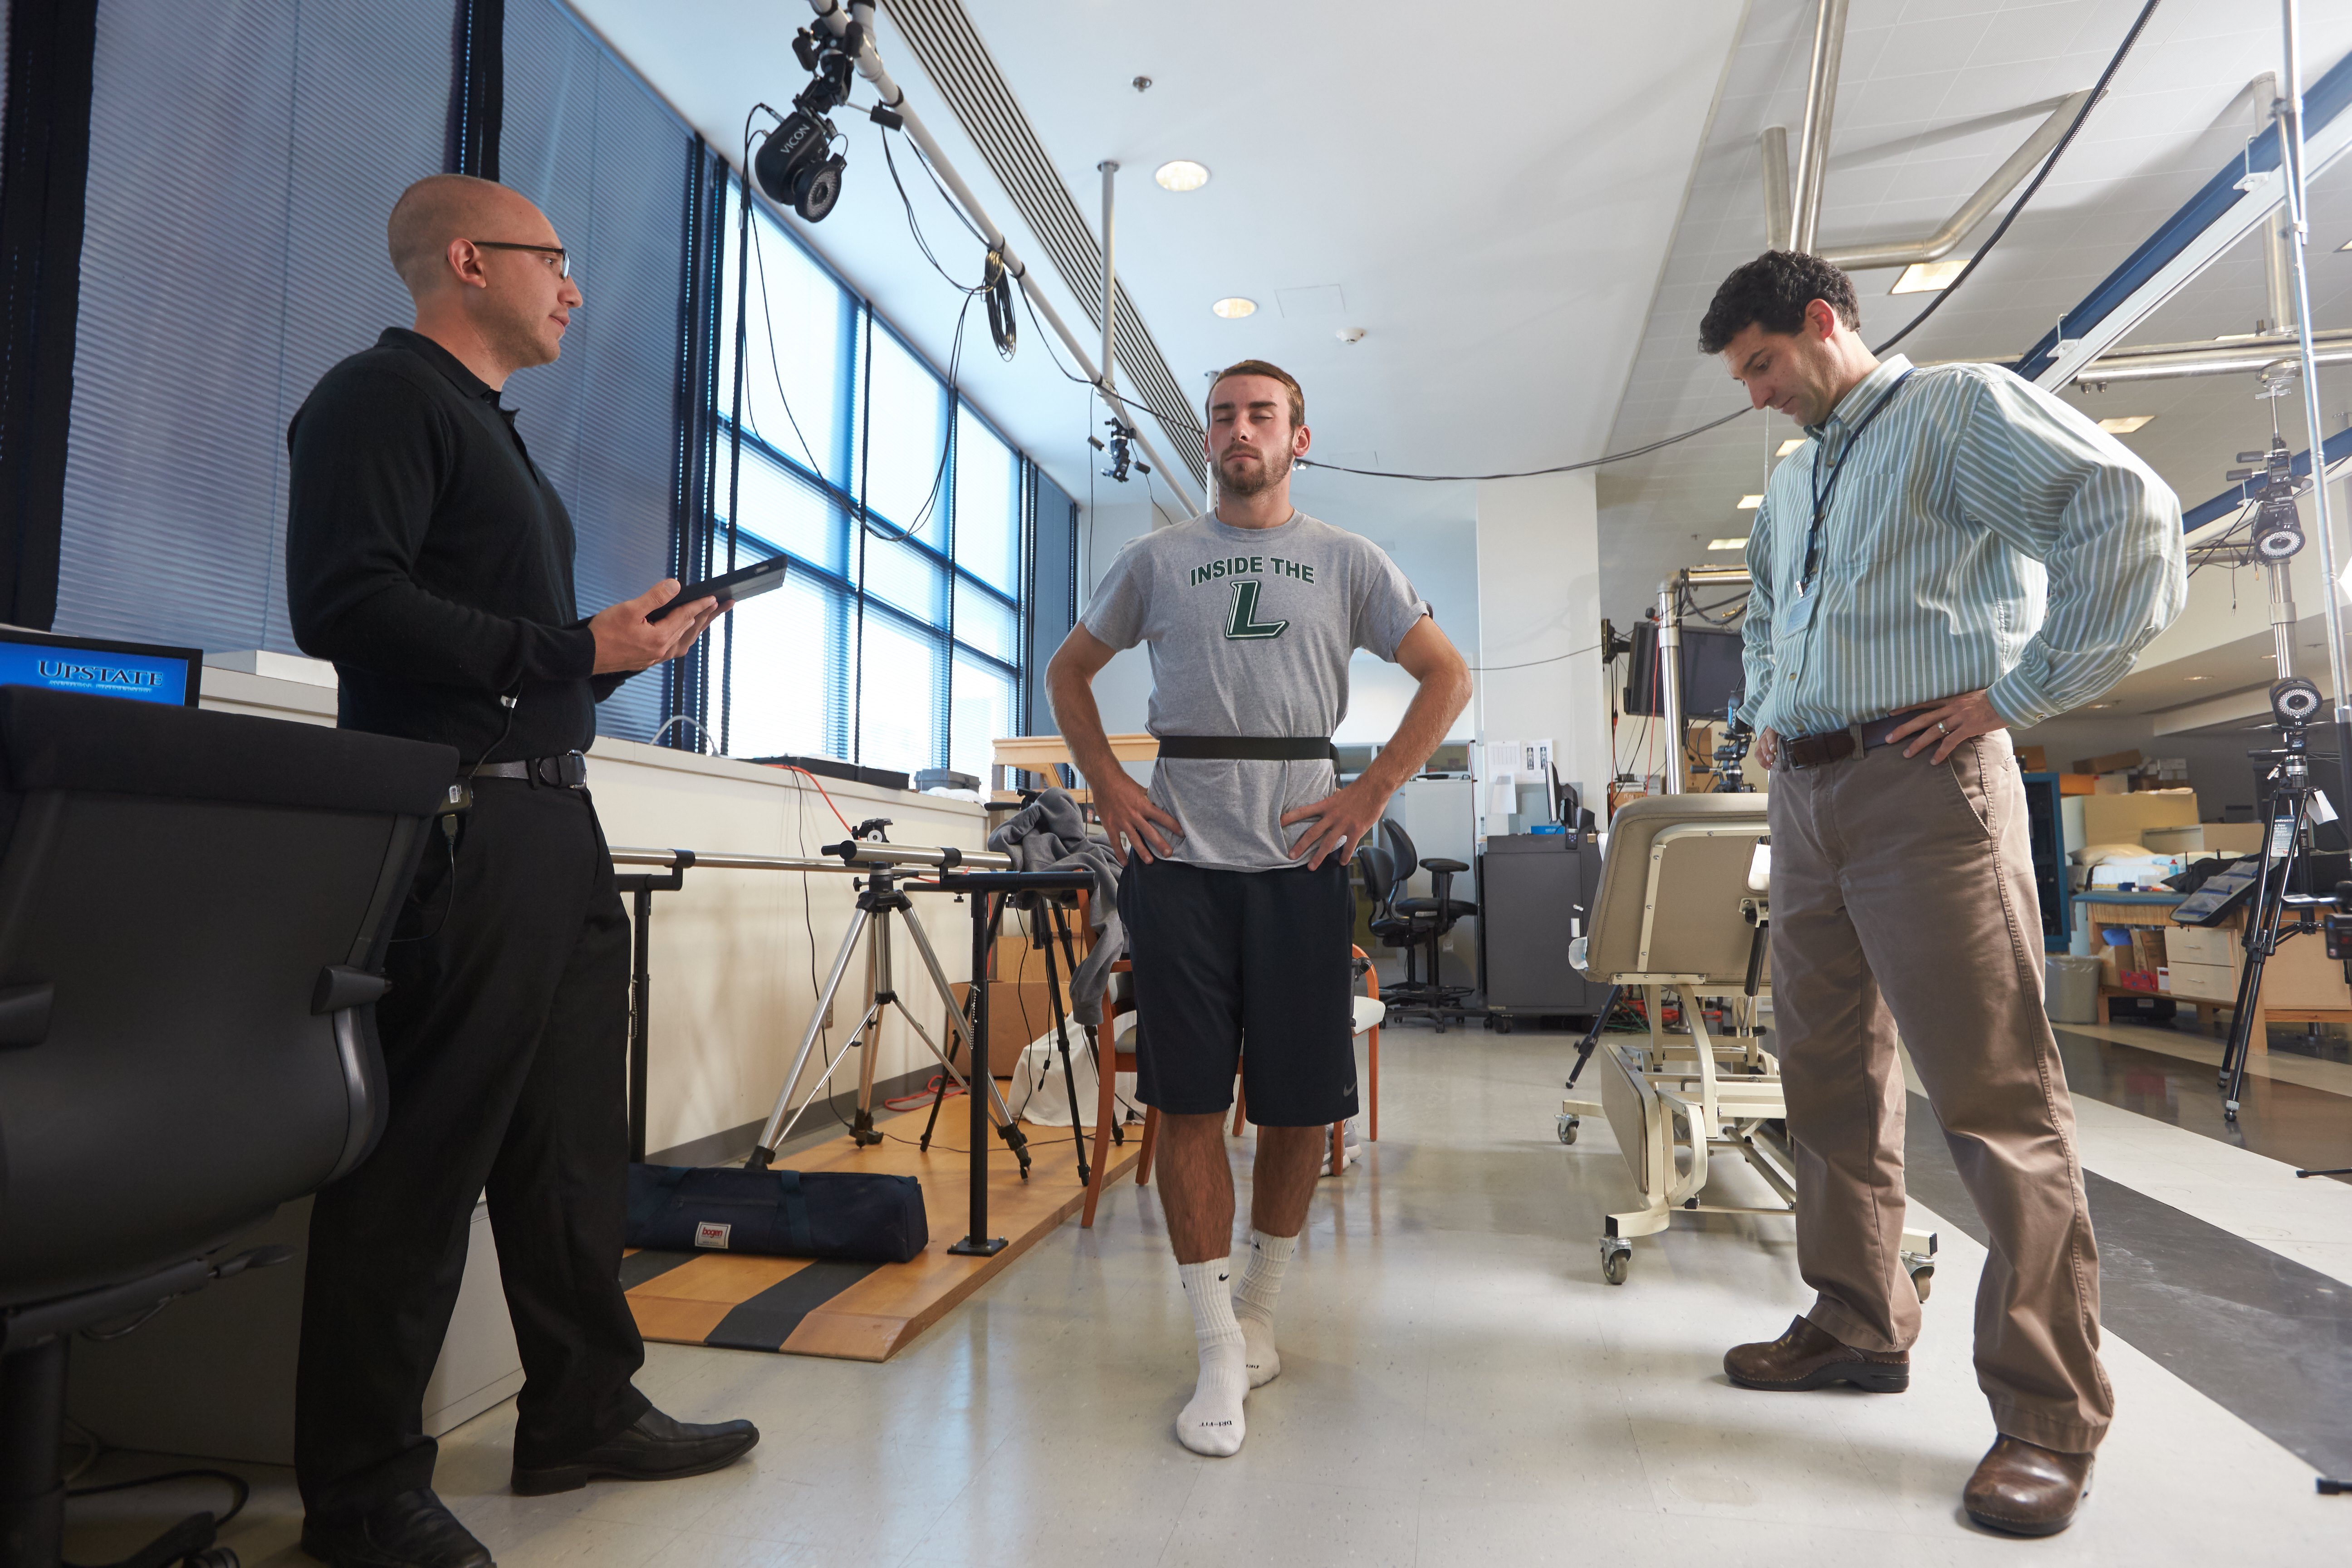 Slack, center, stands on a straight line with his eyes closed to test his physical functions, watched by athletic trainer Joshua Baracks (left) and project director Christopher Neville, PhD. Before that, test subjects are asked to recite a series of words and count backwards, and afterward, an EEG is used to track and record brain patterns.